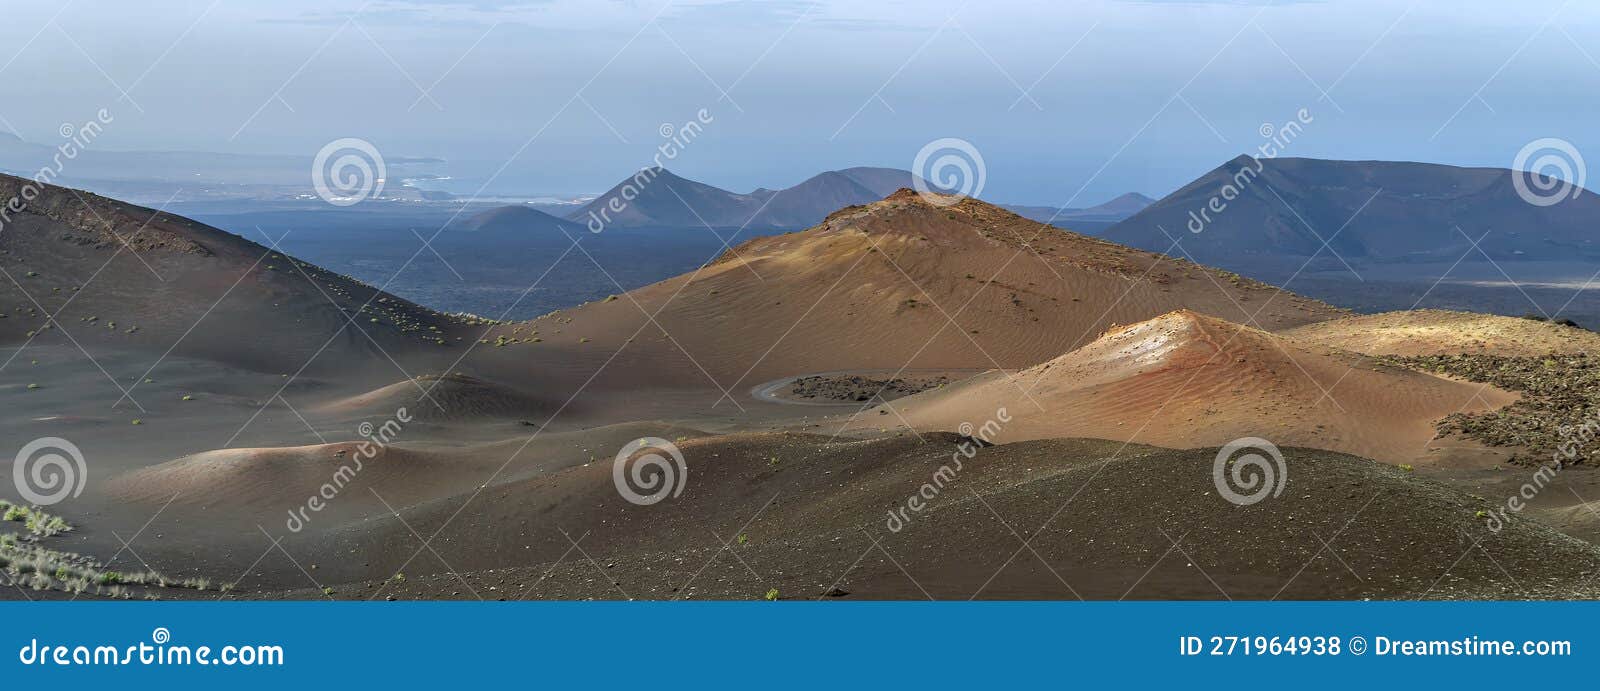 banner size view of desert the timanfaya national park (montaÃ±a de fuego), lanzarote, canary islands, spain